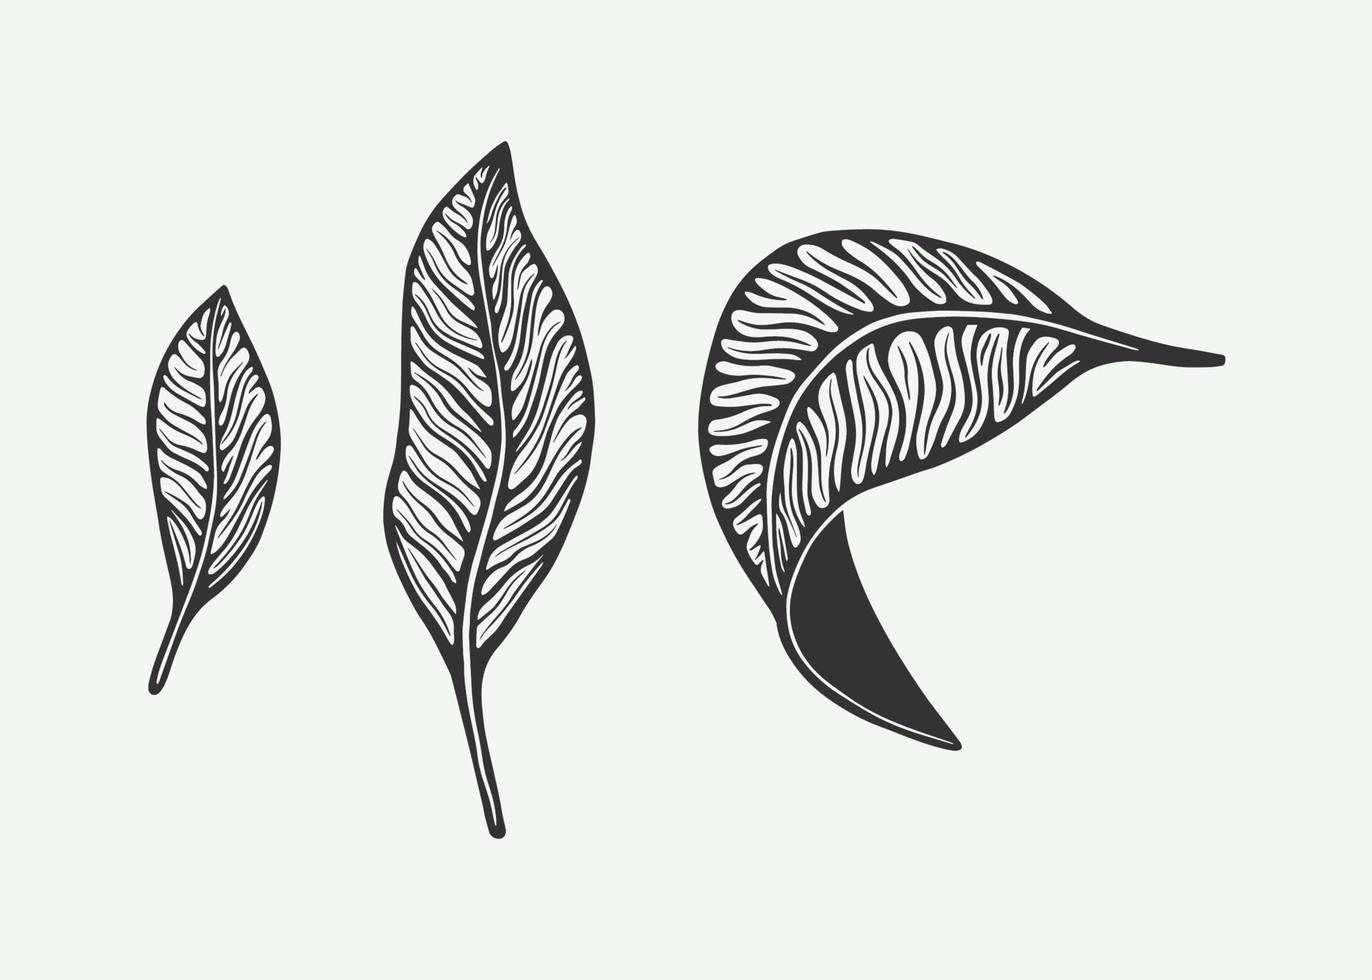 Retro vintage coffee or tea leafs. Can be used for logo, badge or emblem design. Line woodcut style. Monochrome Graphic Art. Vector Illustration.